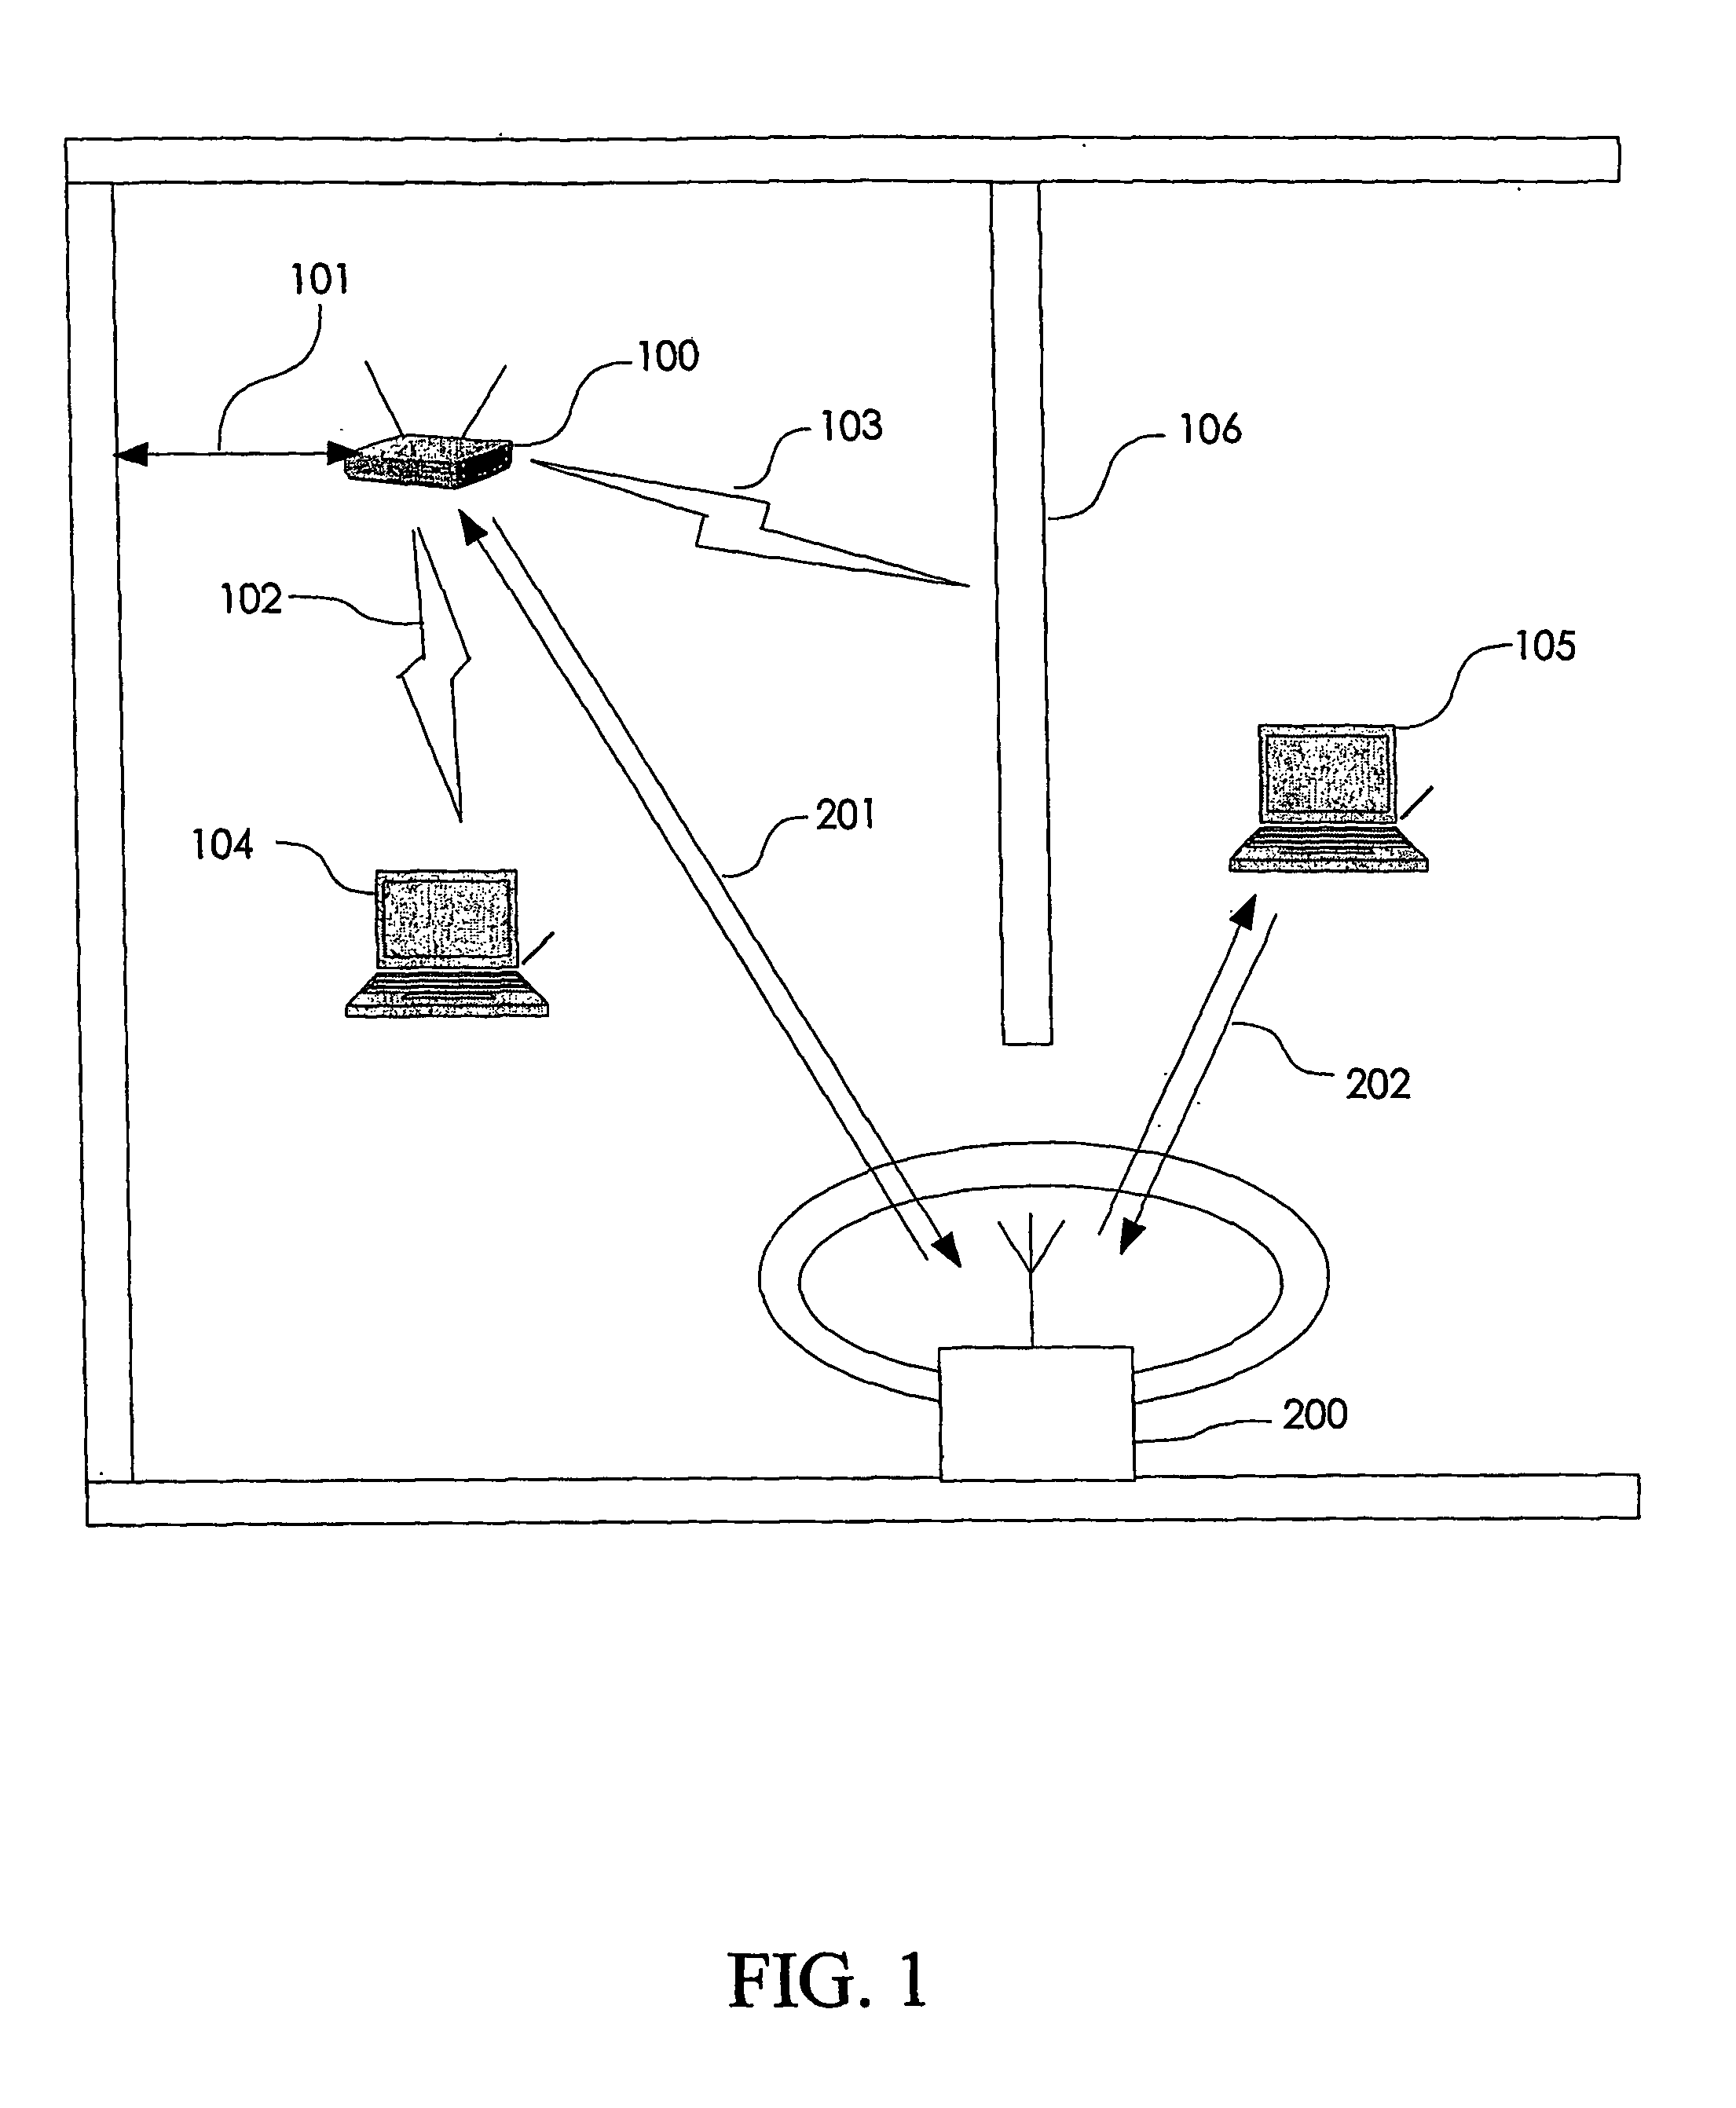 Wireless area network using frequency translation and retransmission based on modified protocol messages for enhancing network coverage